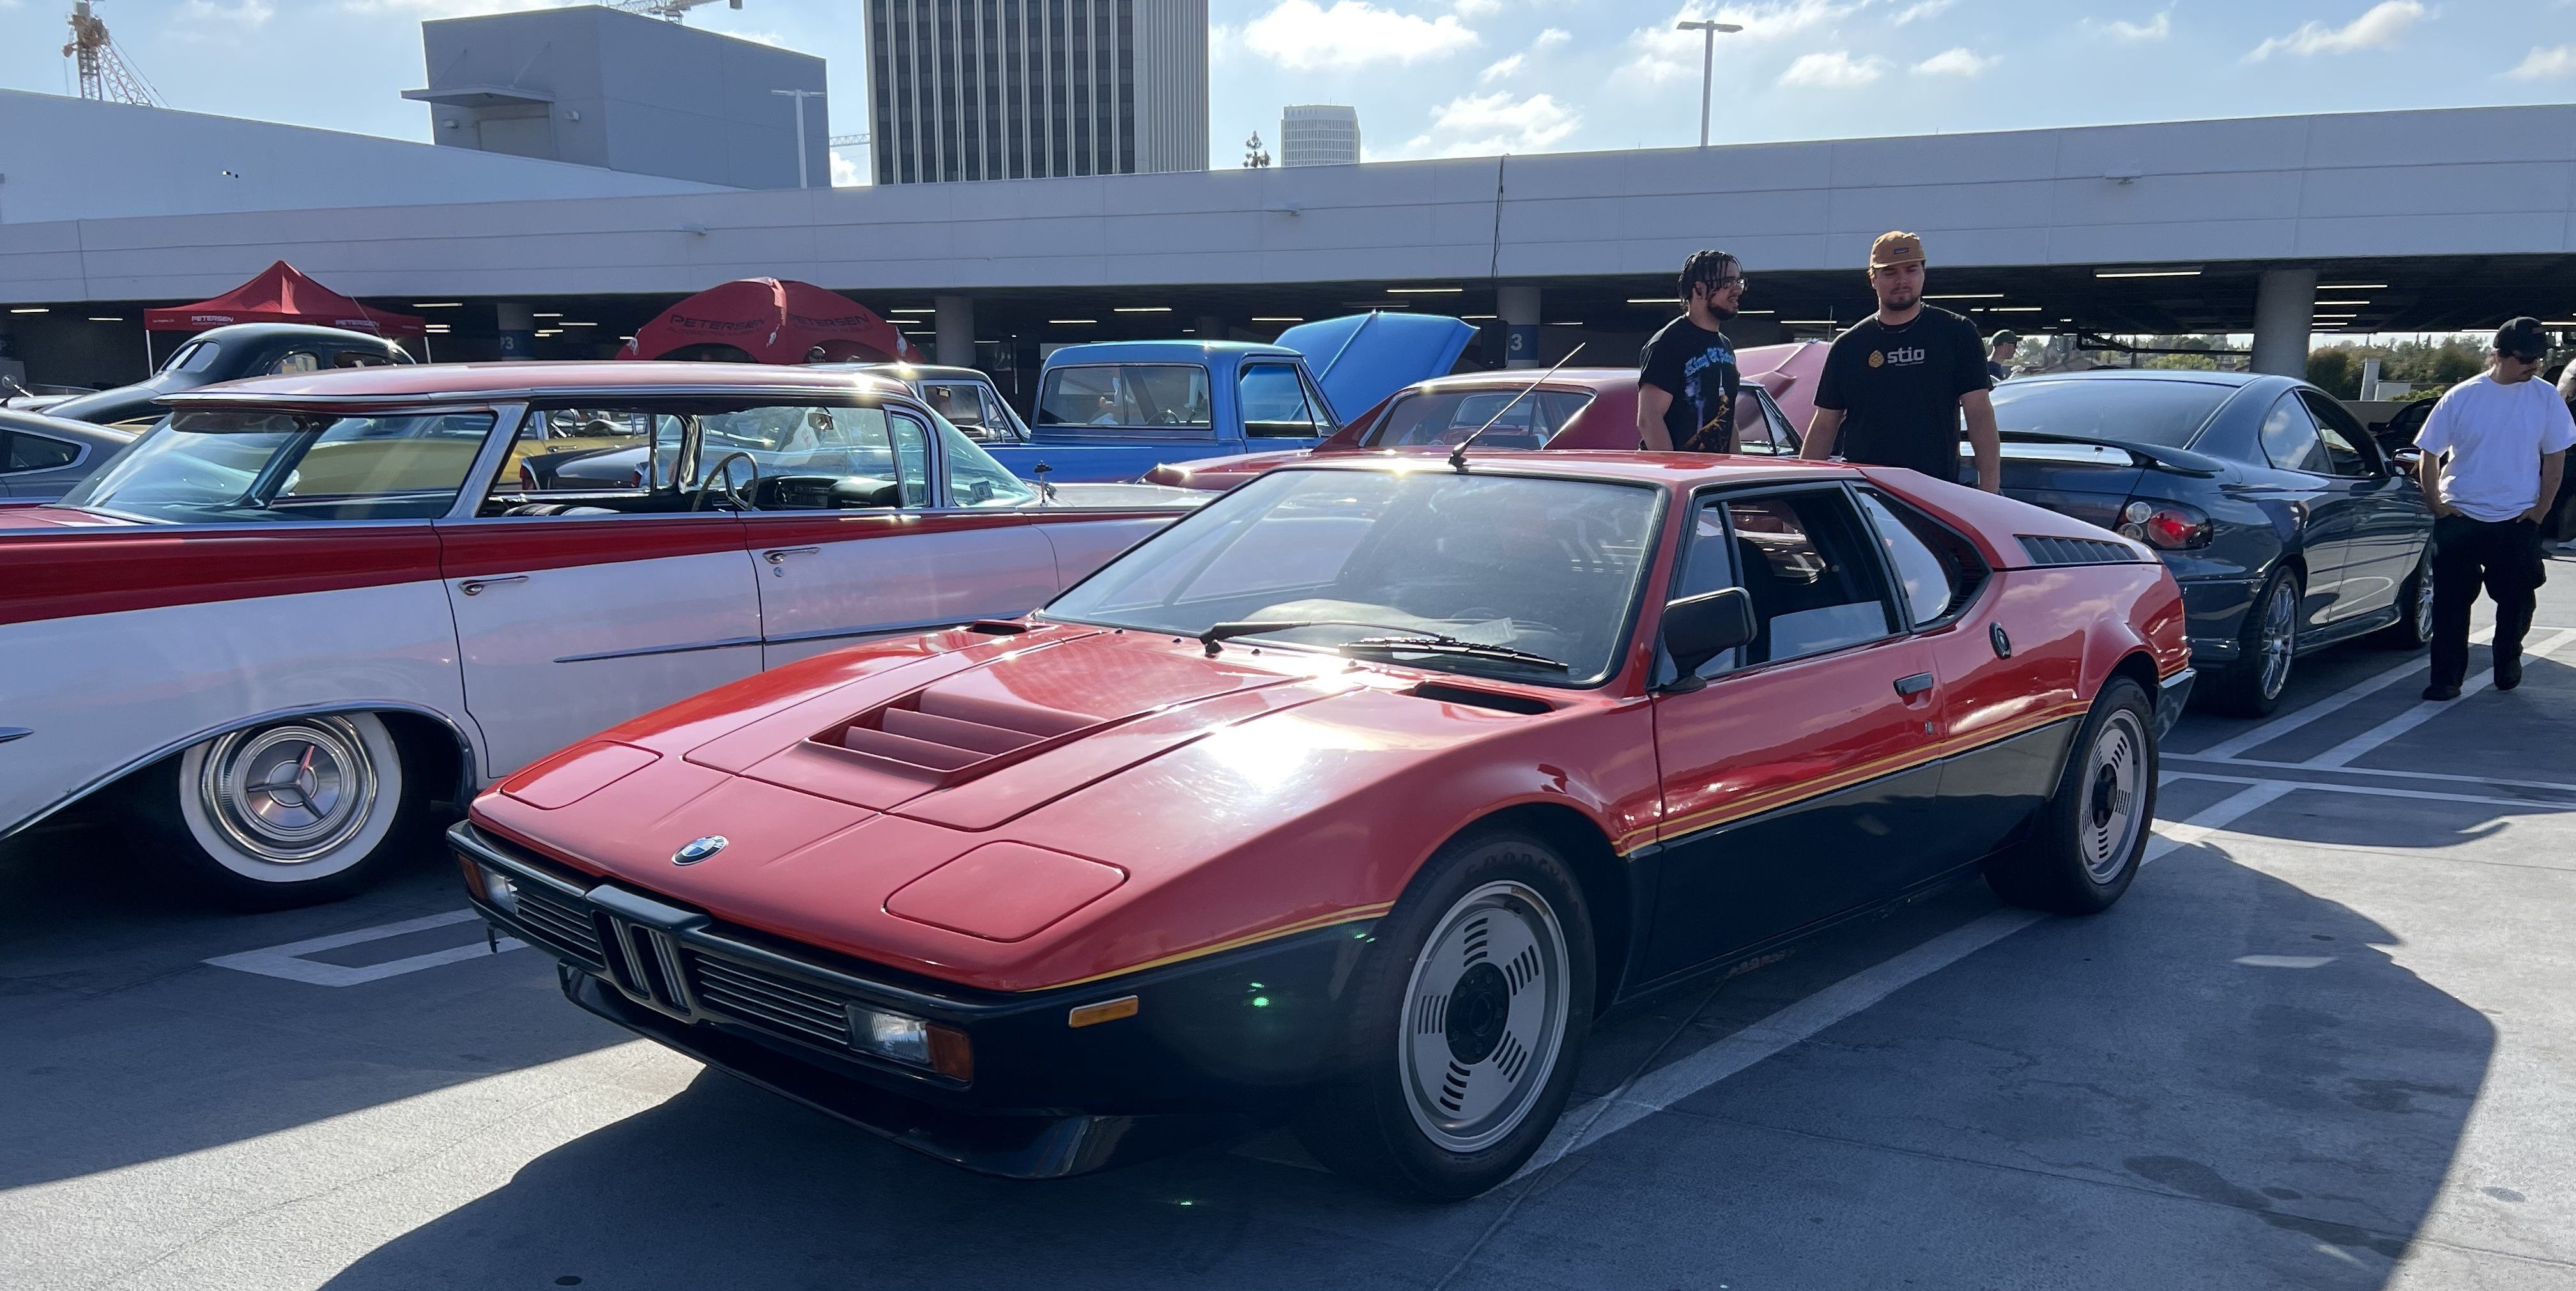 The Petersen's Breakfast Club Cruise-In Is Amazing Every Time